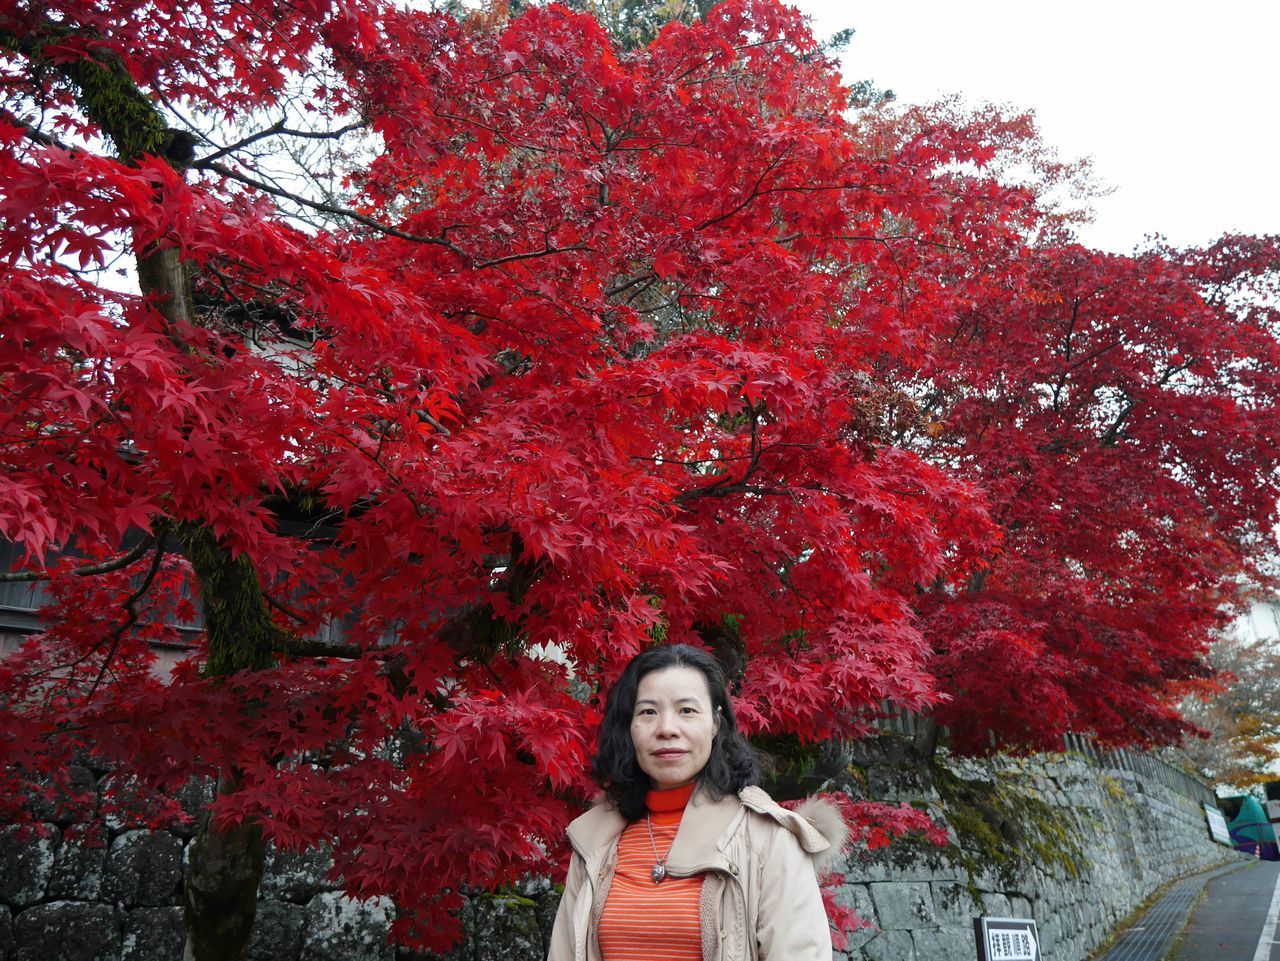 tree, lifestyles, leisure activity, casual clothing, person, red, young adult, standing, looking at camera, front view, autumn, season, smiling, park - man made space, young women, day, portrait, nature